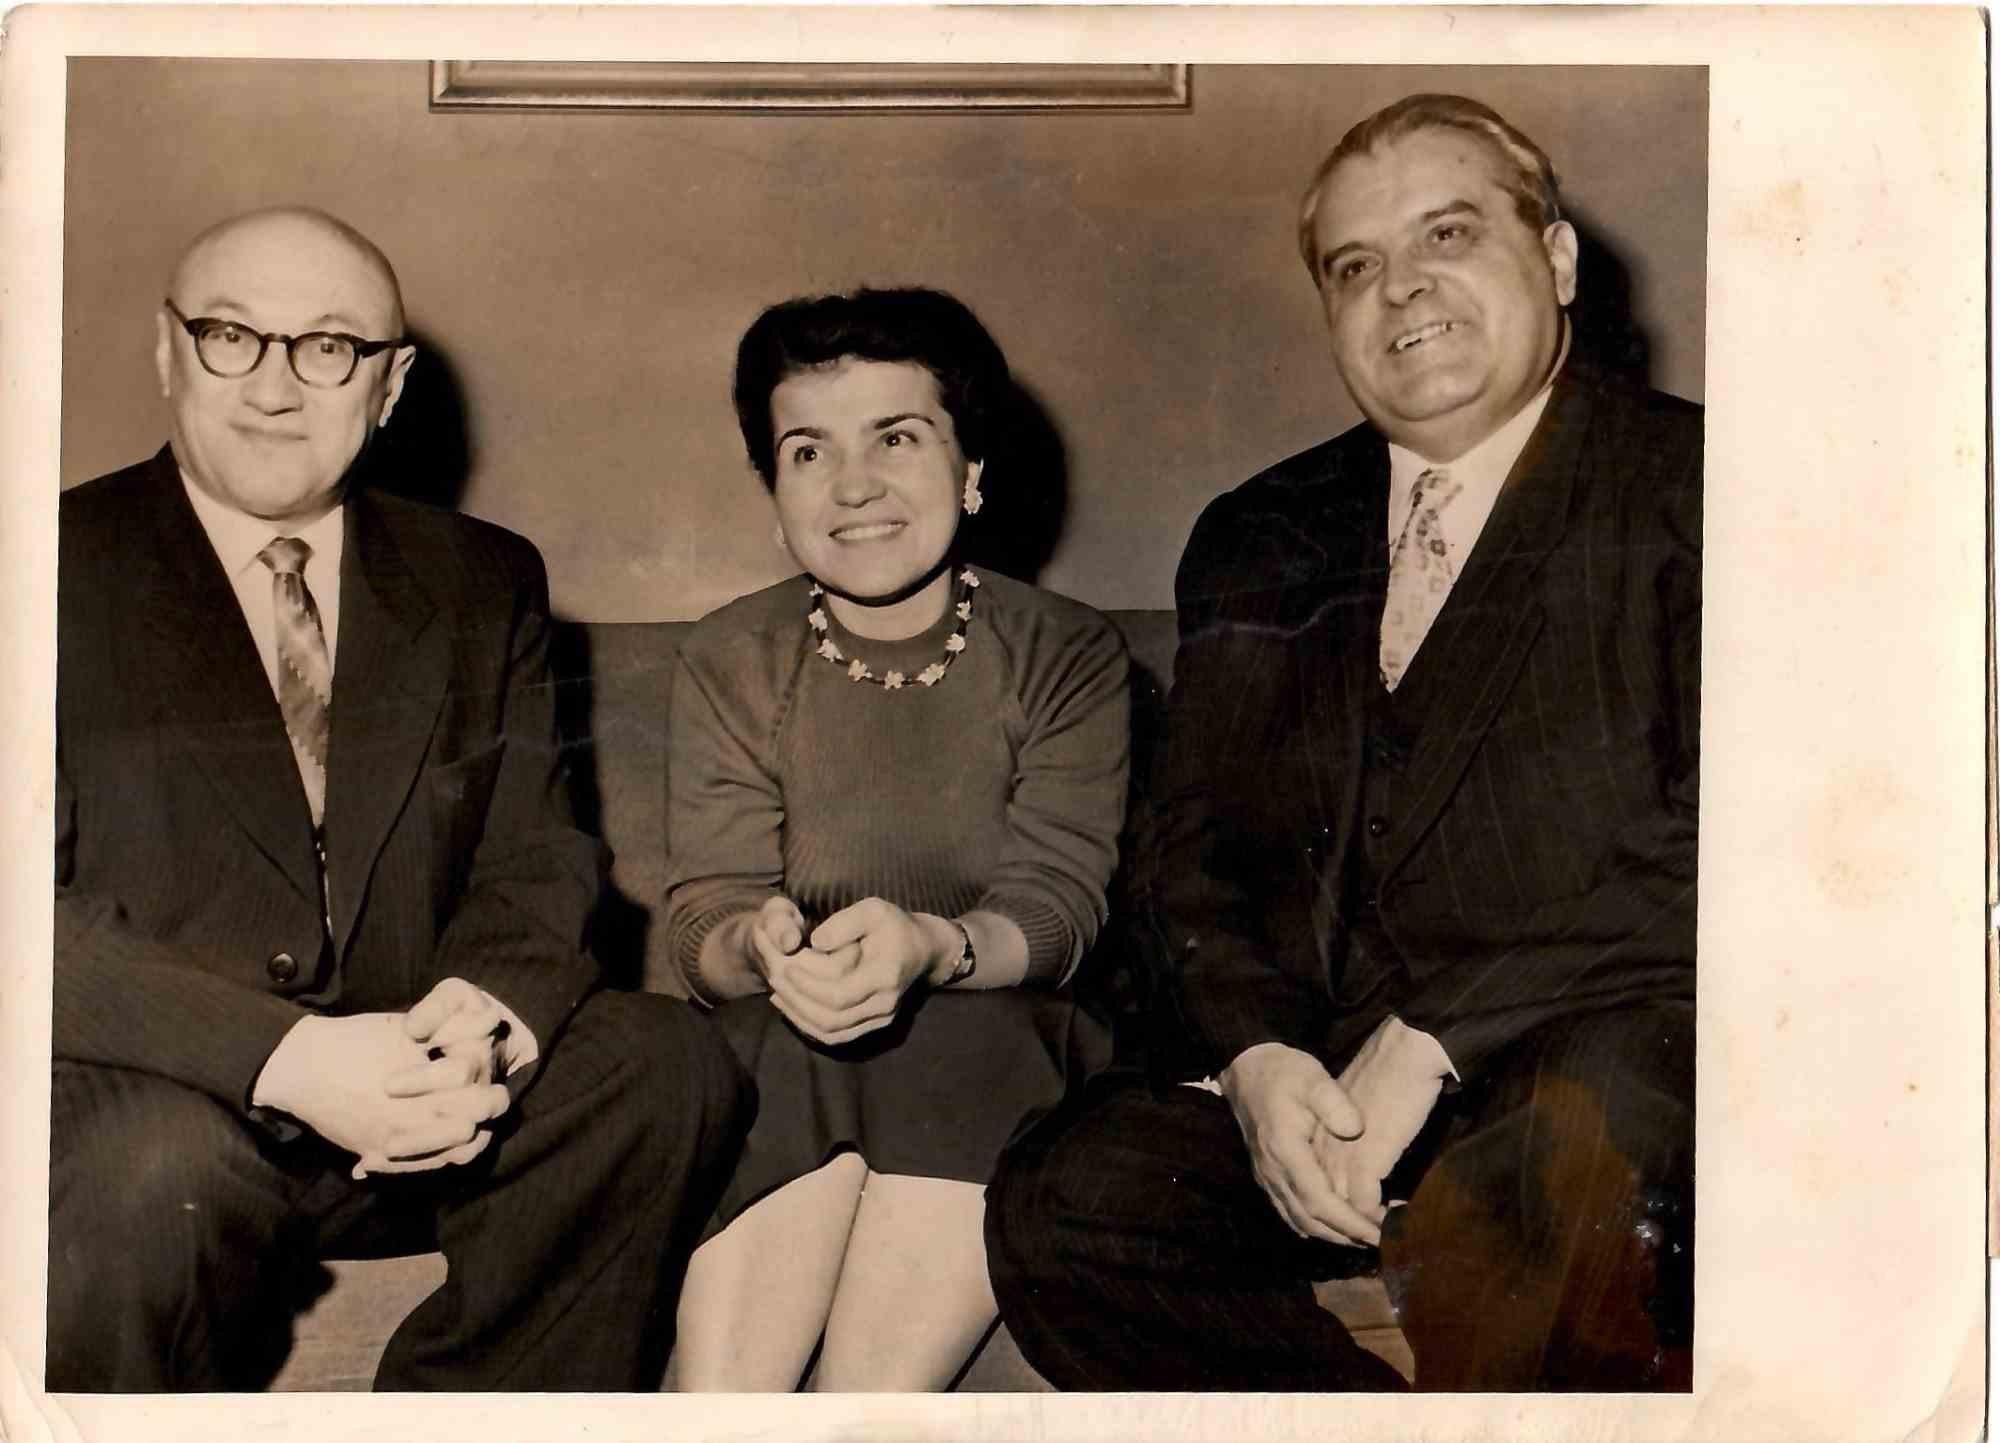 Three Russian Scientists in New York - Original Photograph - 1960s